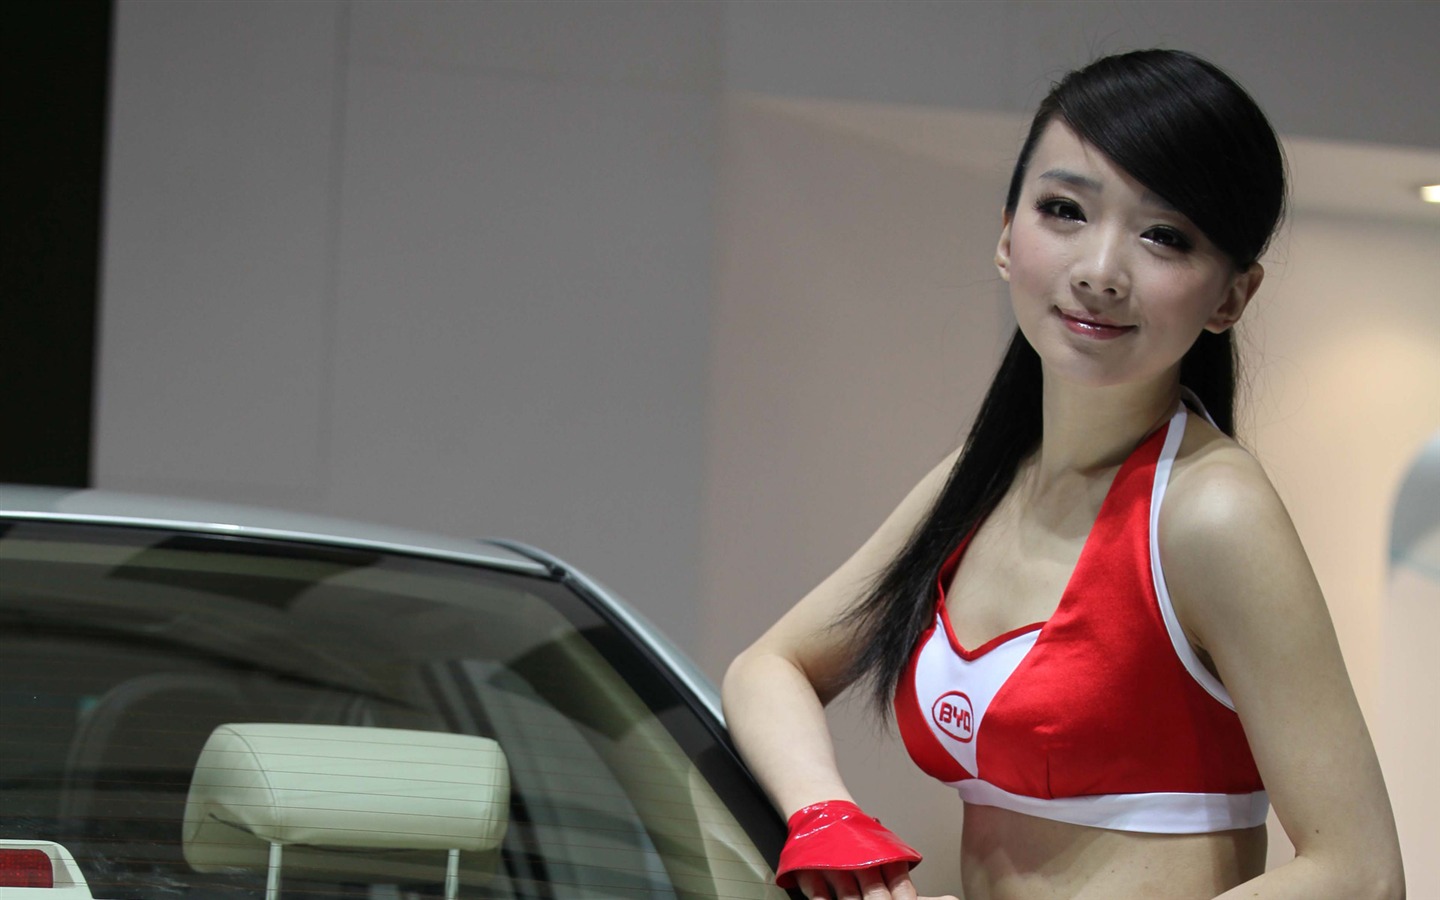 2010 Beijing International Auto Show beauty (1) (the wind chasing the clouds works) #20 - 1440x900